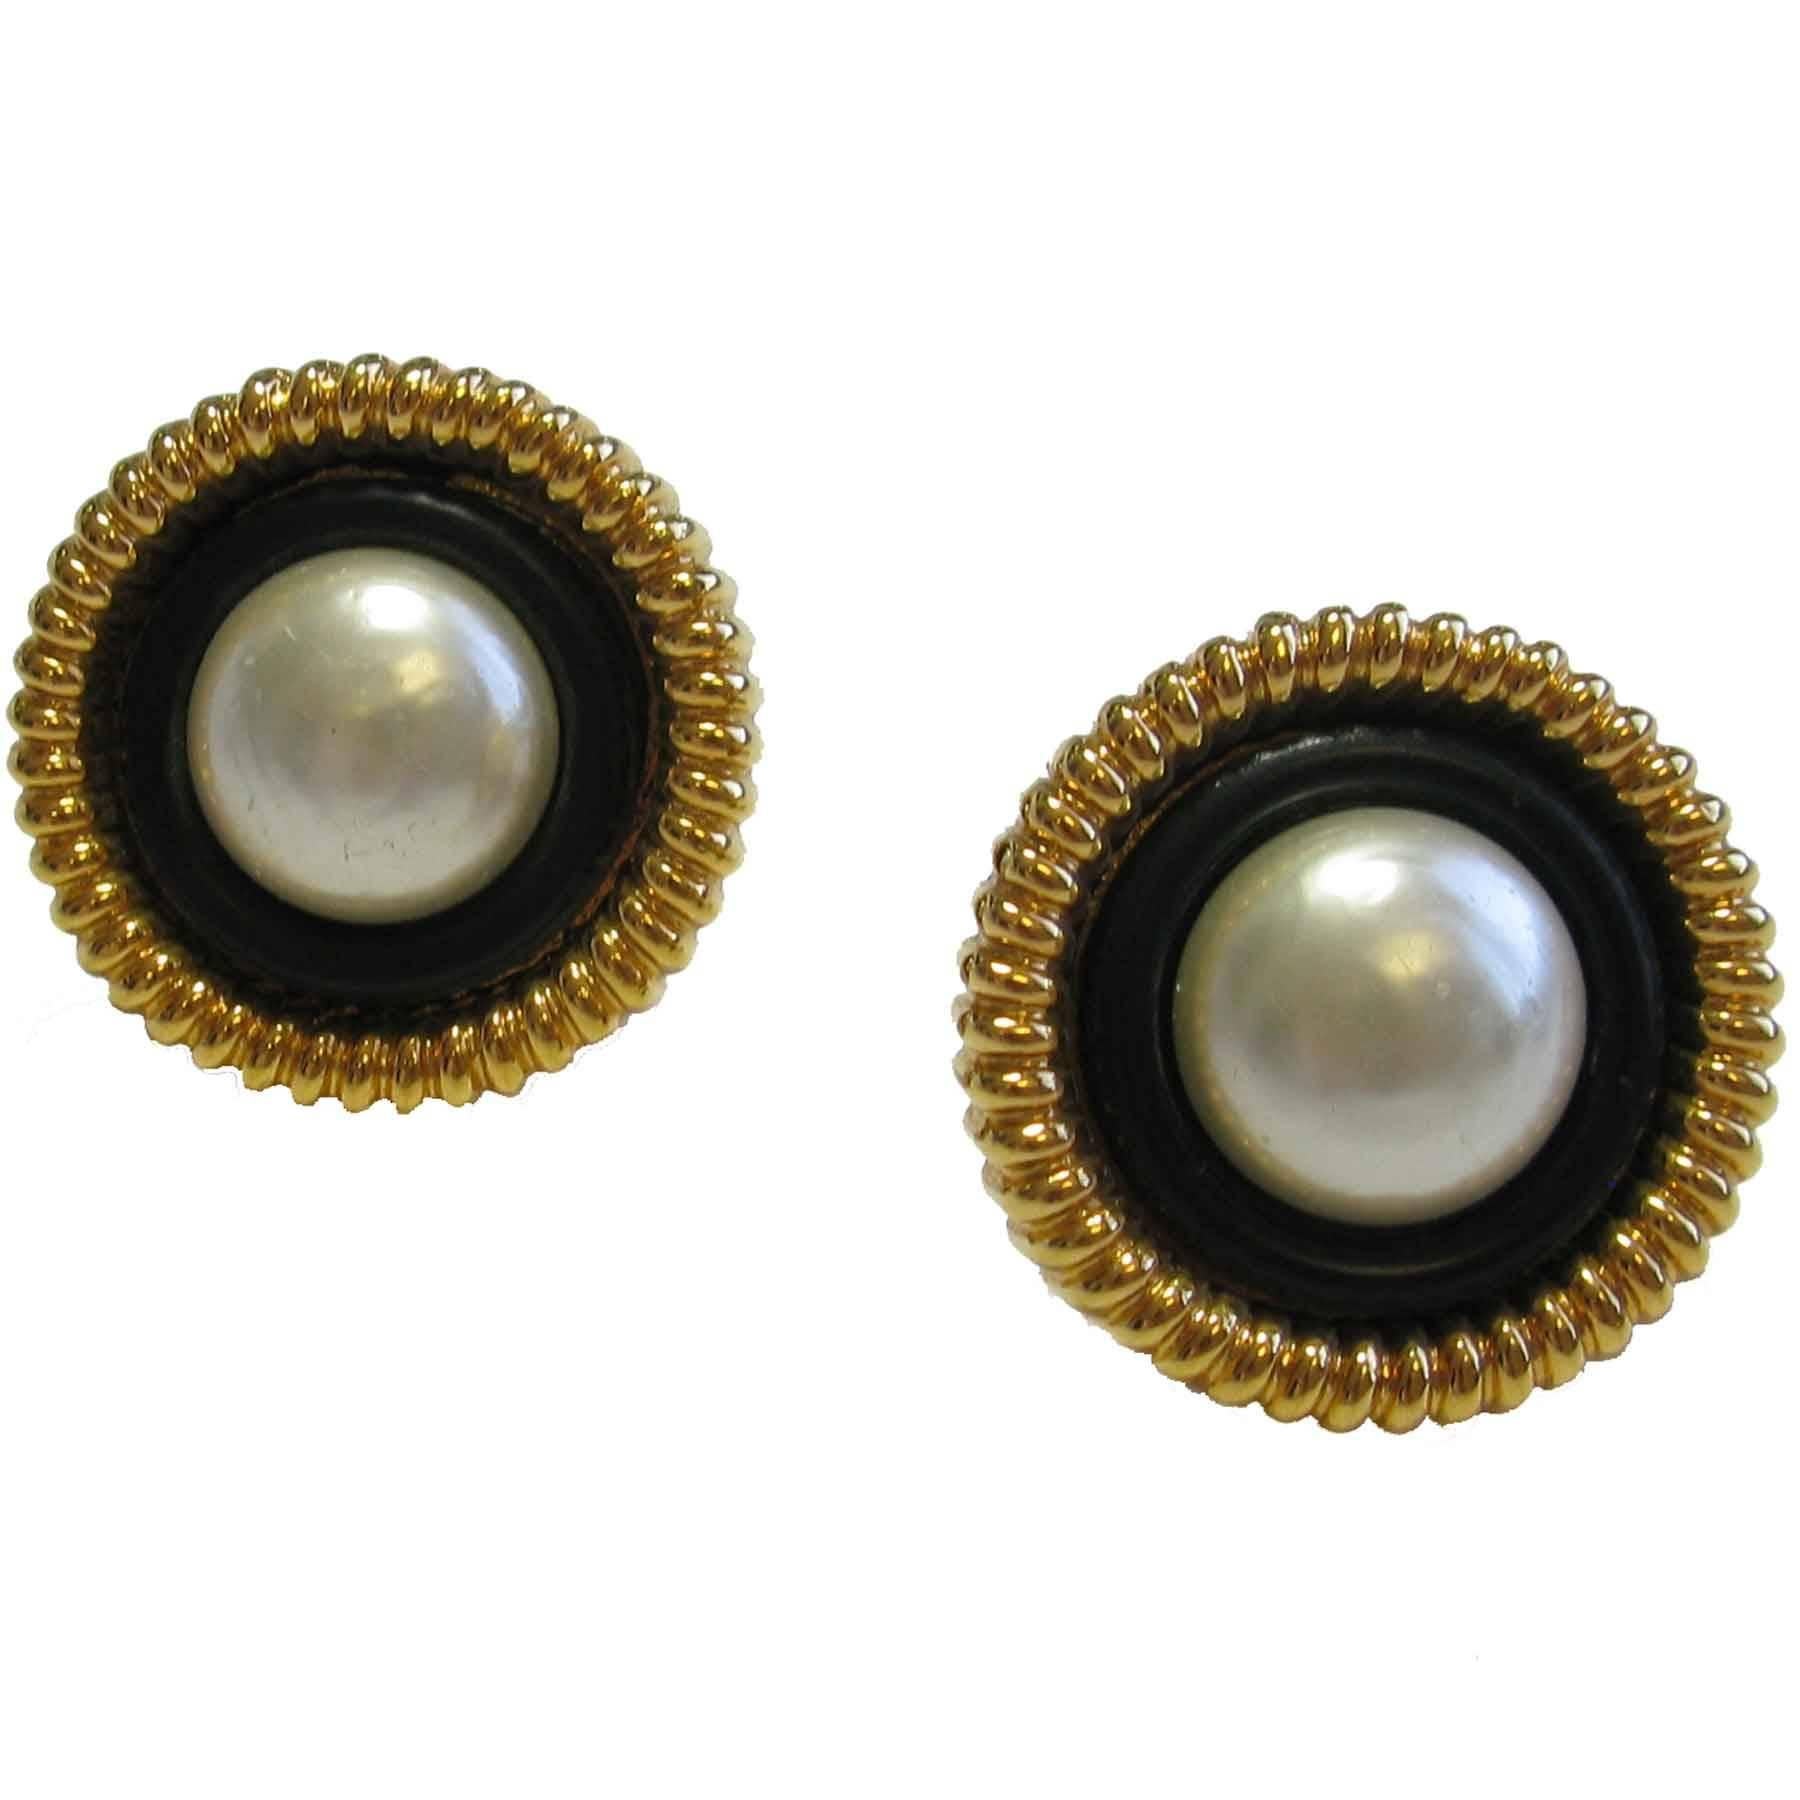 Vintage CHANEL Round Clip-on Earrings in Gilded Metal and Pearl